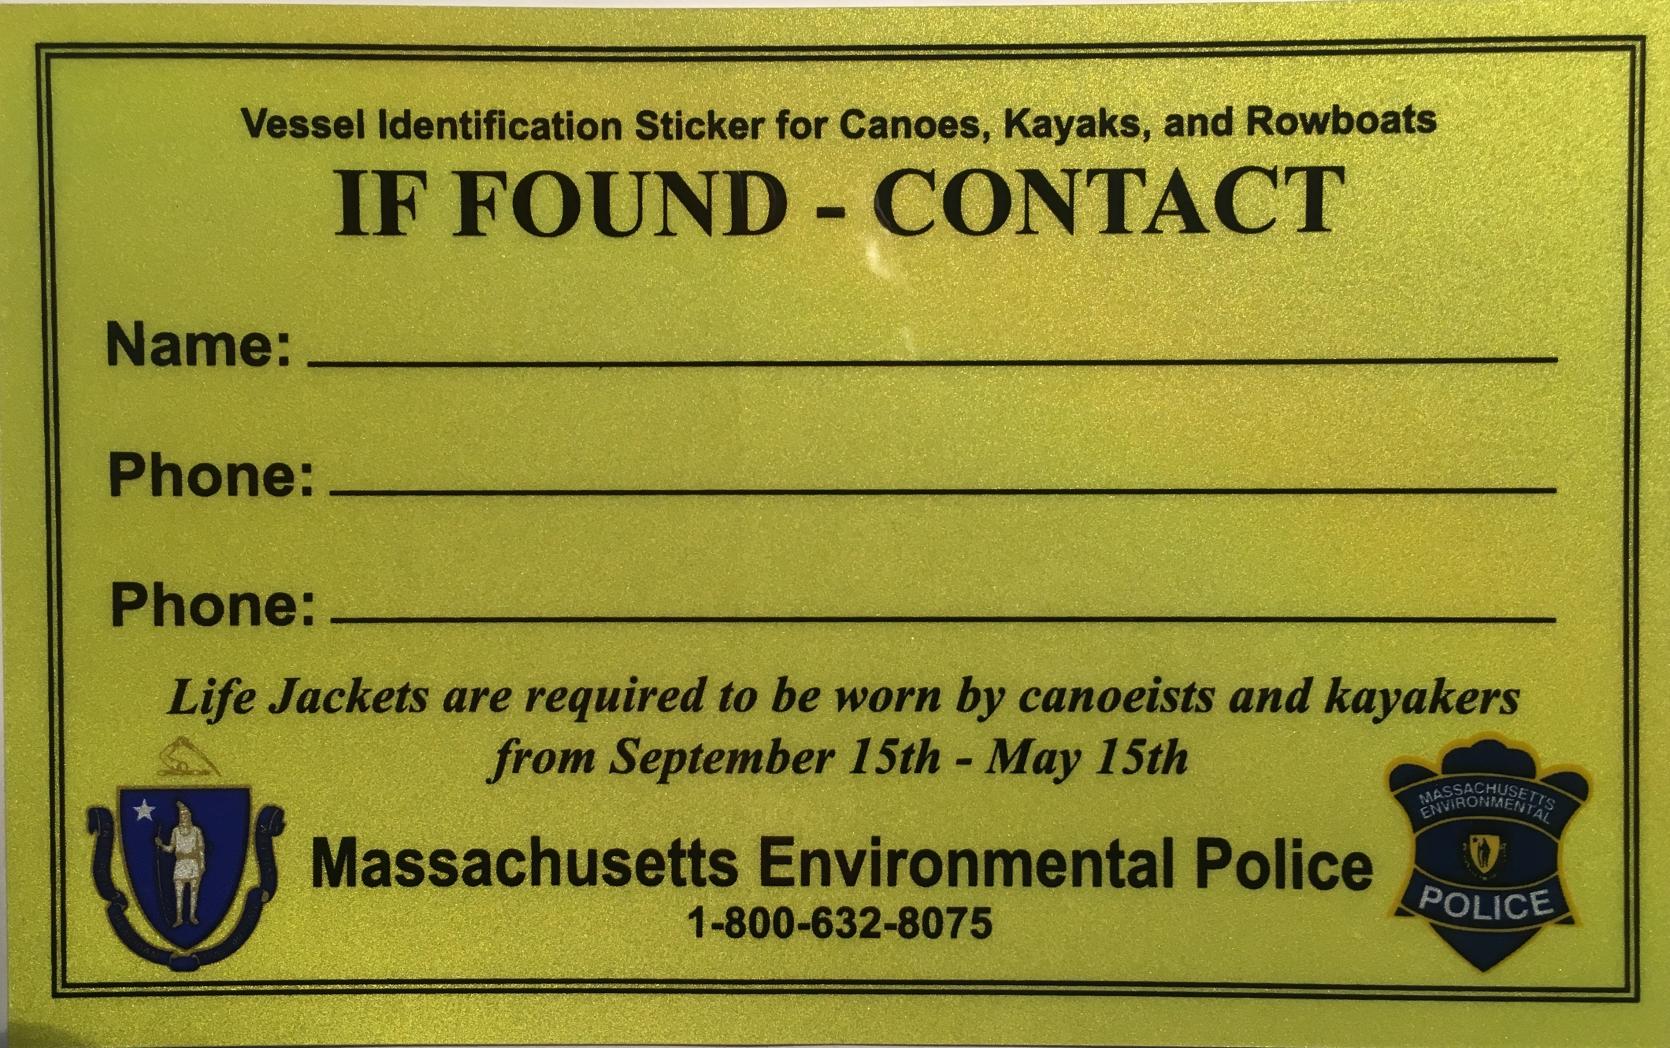 Vessel ID Sticker for Canoes, Kayaks and Rowboats